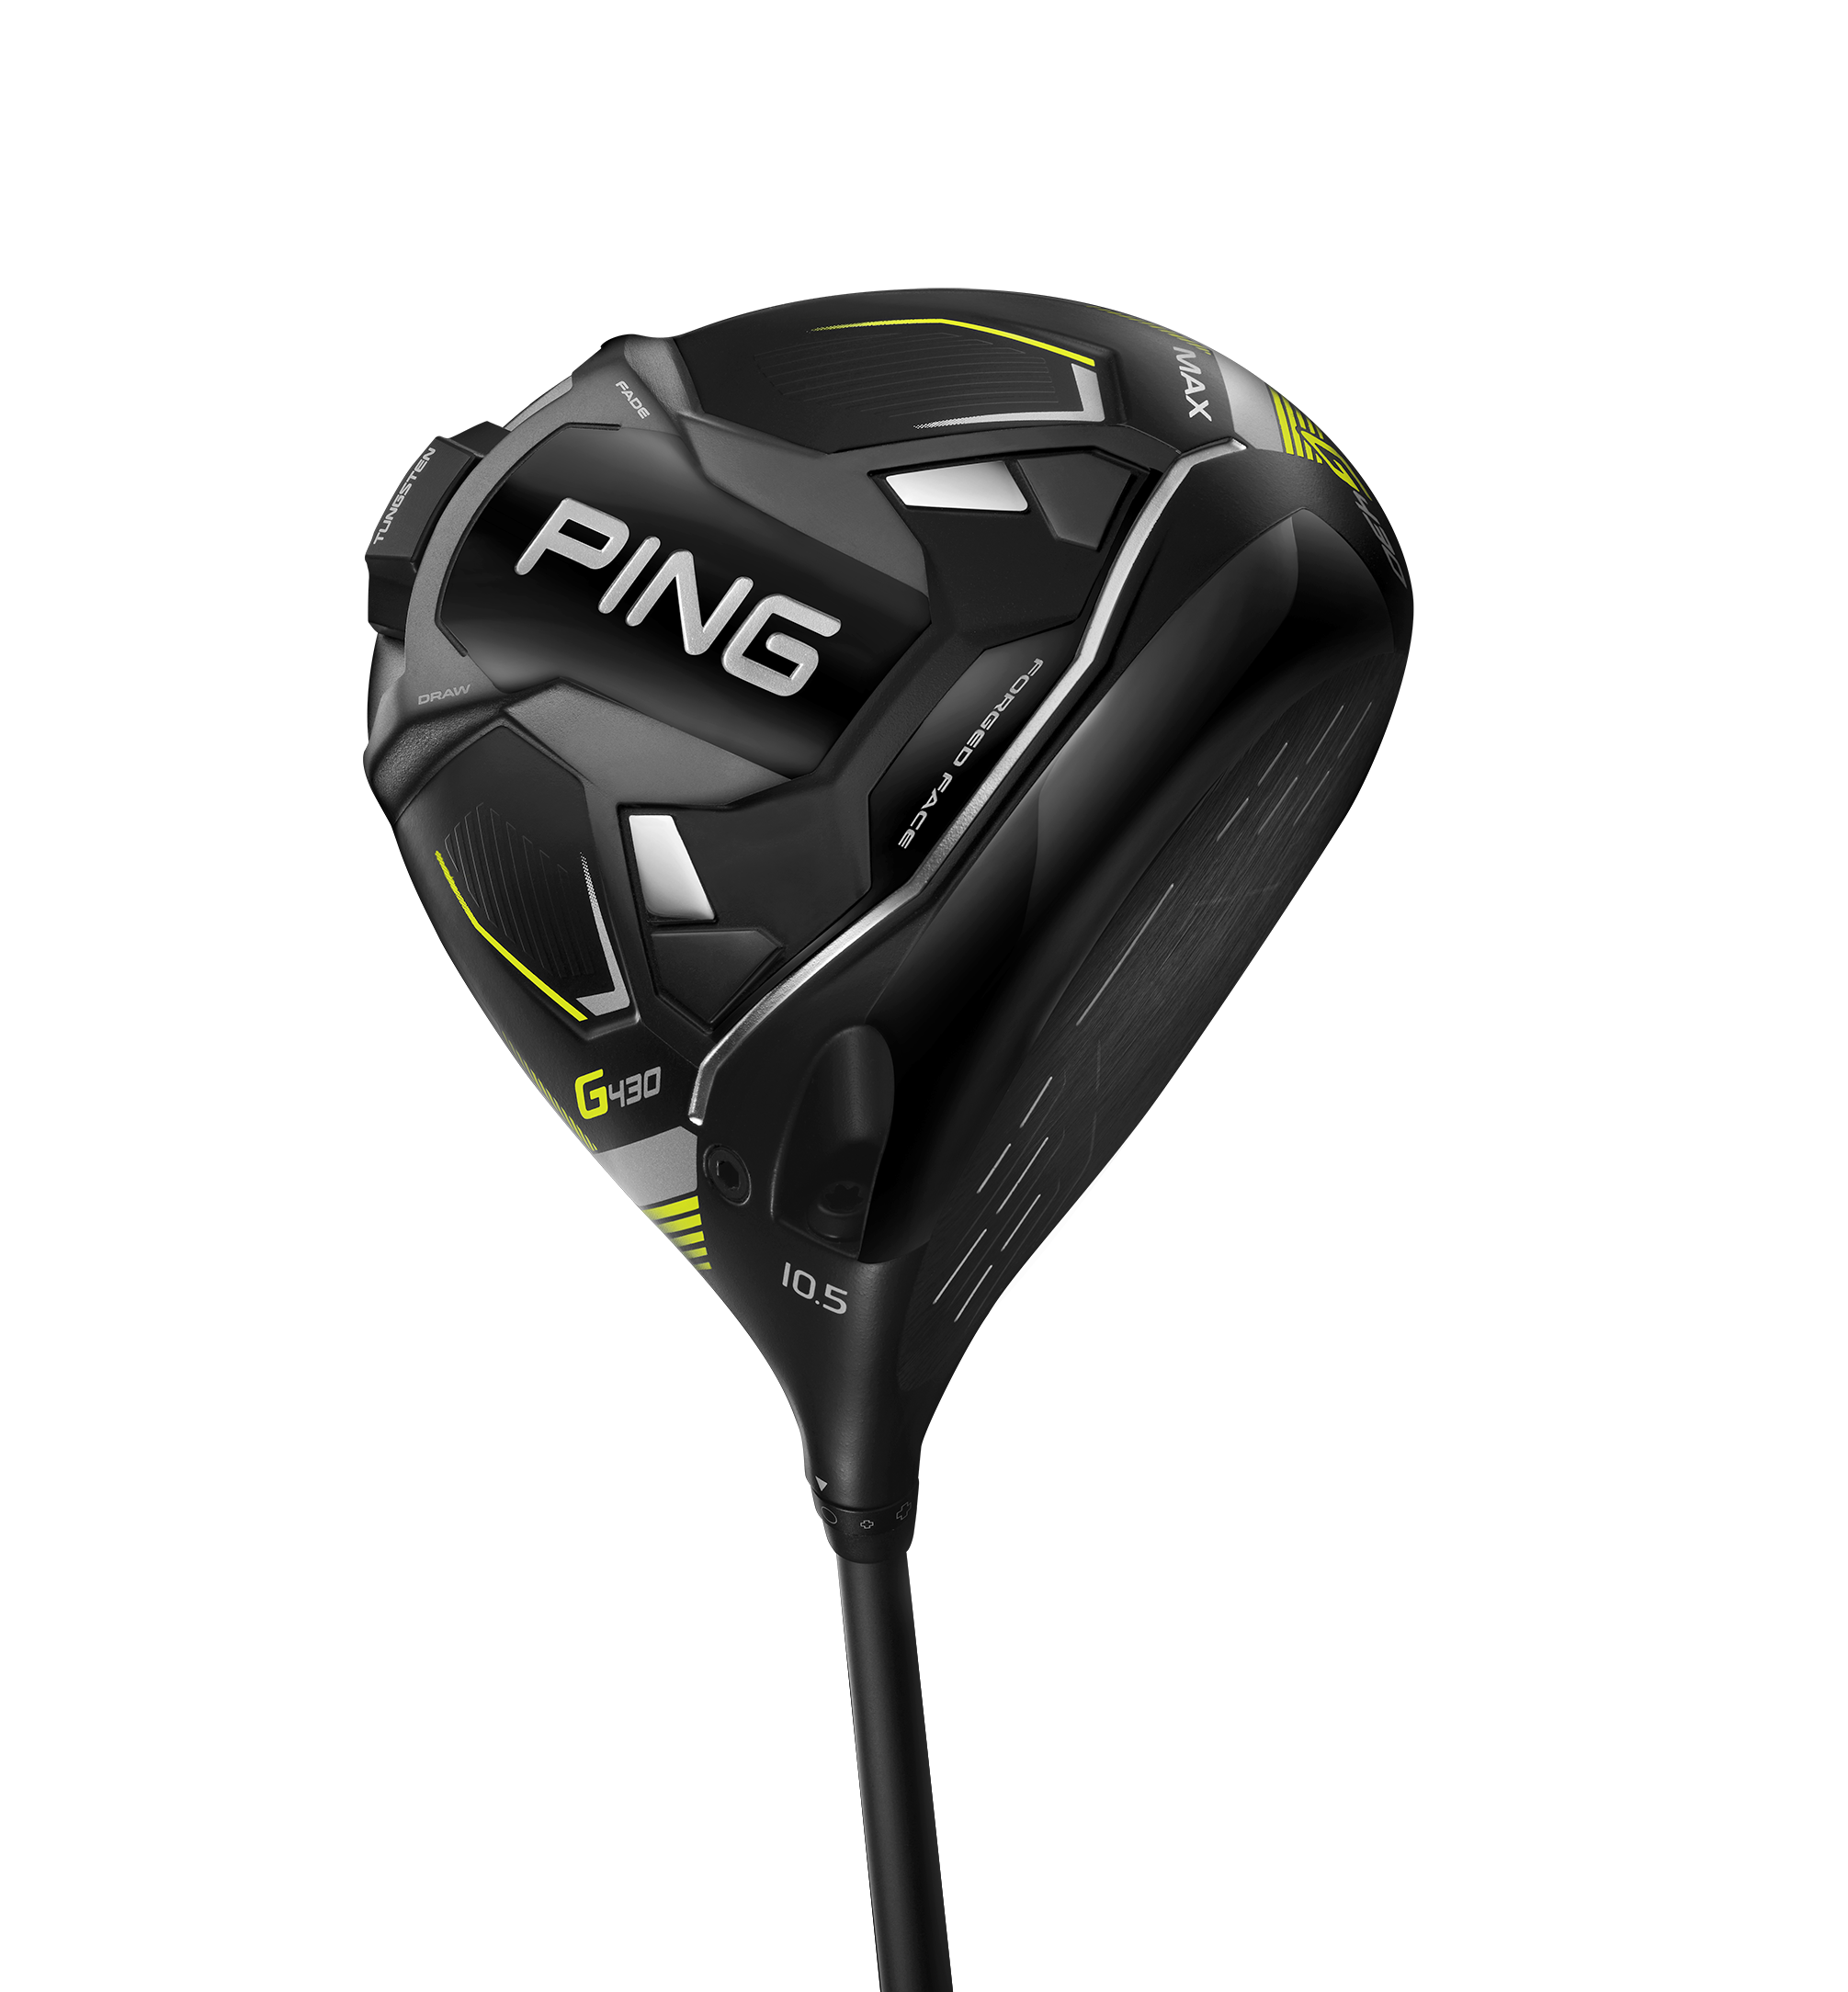 Ping G430 drivers: What you need to know | Golf Equipment: Clubs